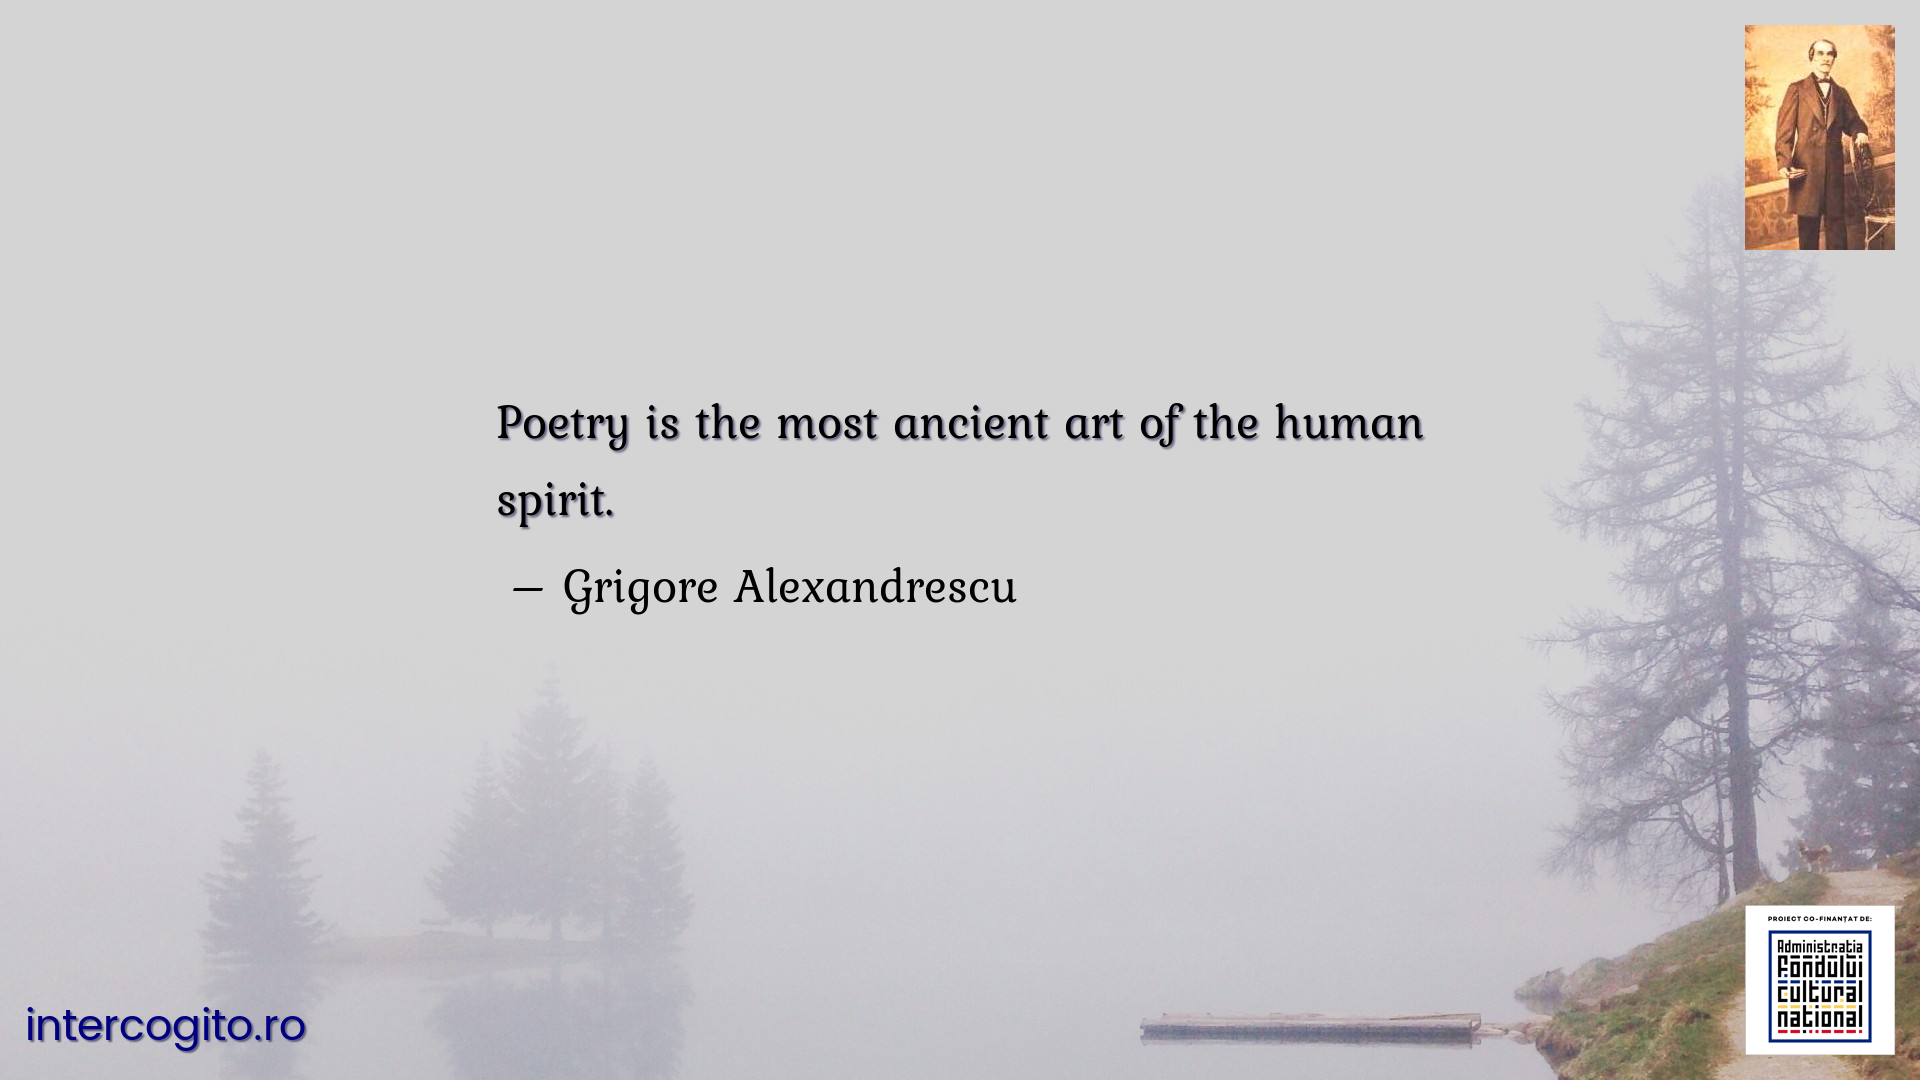 Poetry is the most ancient art of the human spirit.